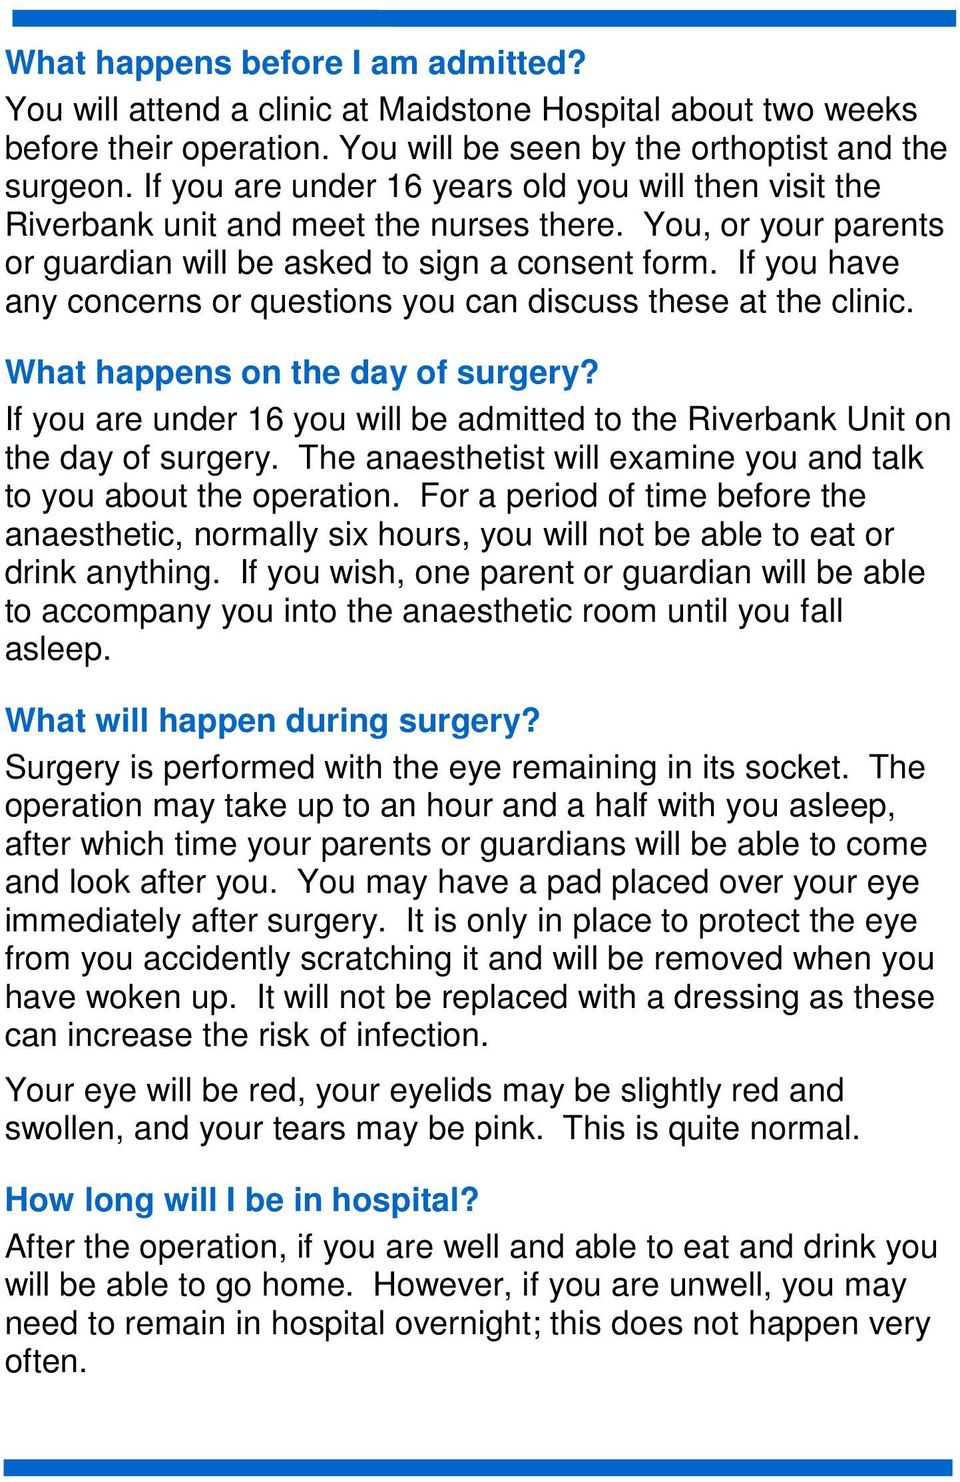 If you have any concerns or questions you can discuss these at the clinic. What happens on the day of surgery? If you are under 16 you will be admitted to the Riverbank Unit on the day of surgery.